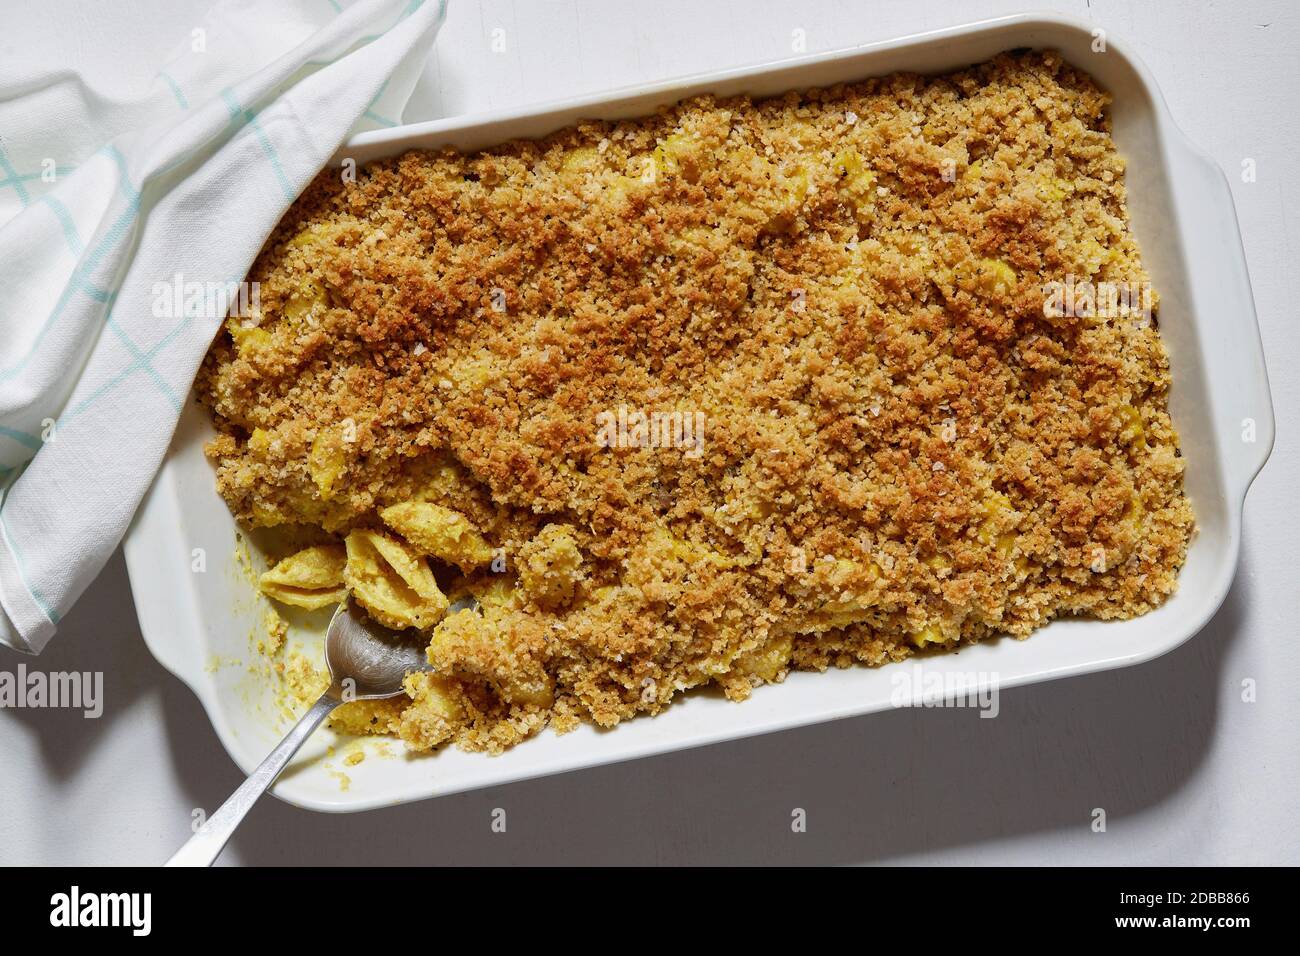 Close-up of casserole in dish Stock Photo